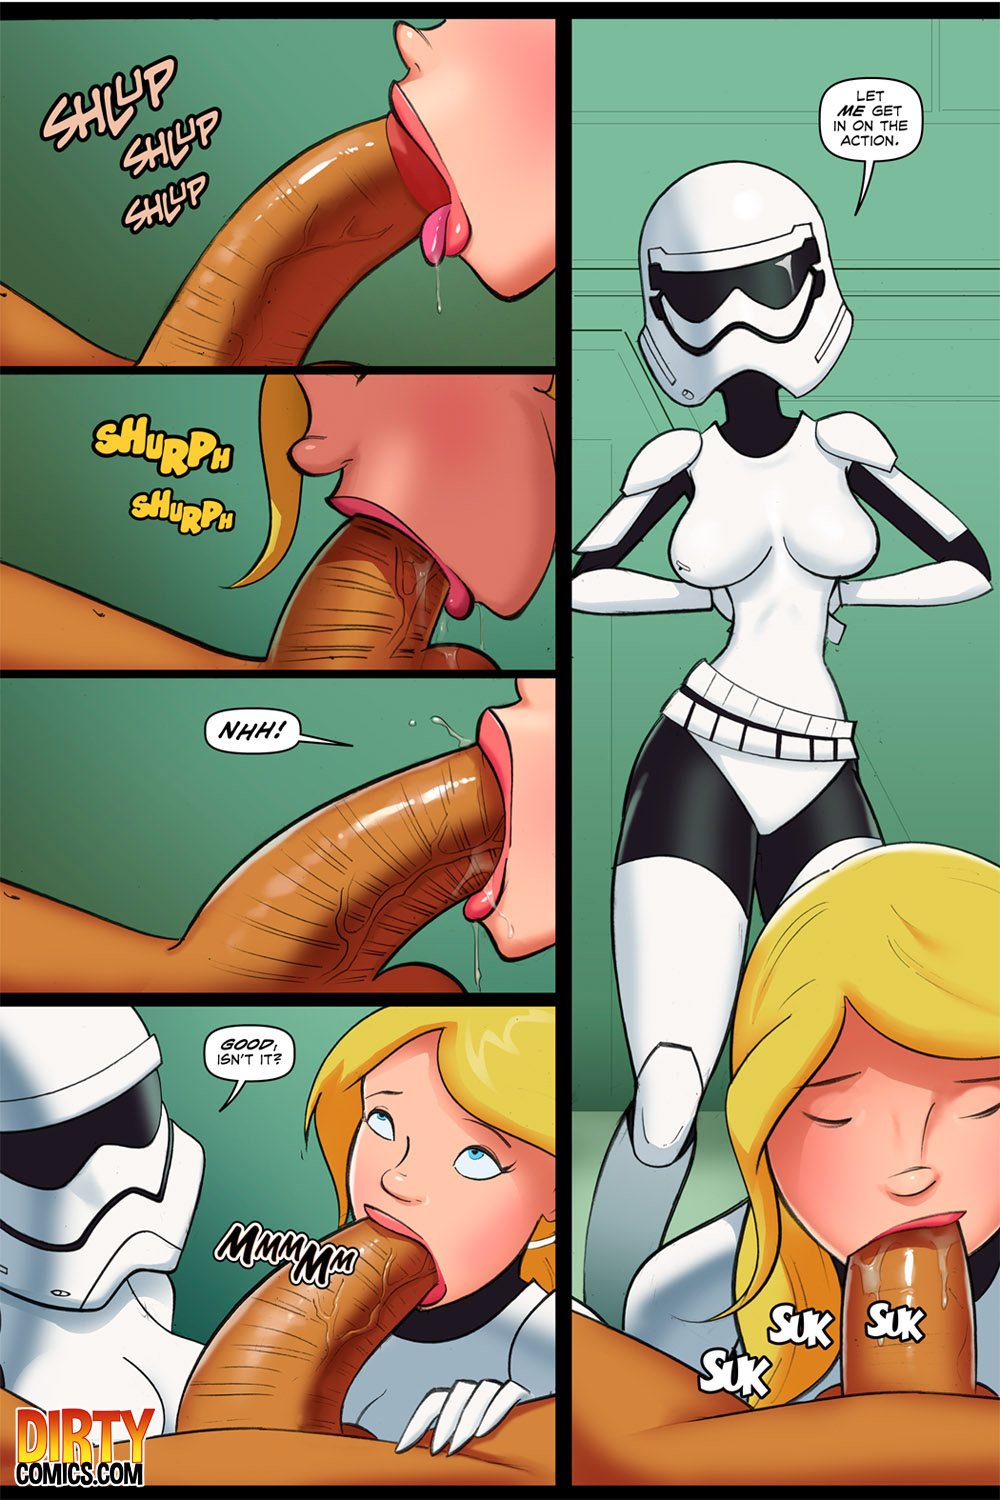 Star Wars Porn Big Boobs - Star Porn - The Cock Awakens Star Wars by JKR - Complete - FreeAdultComix